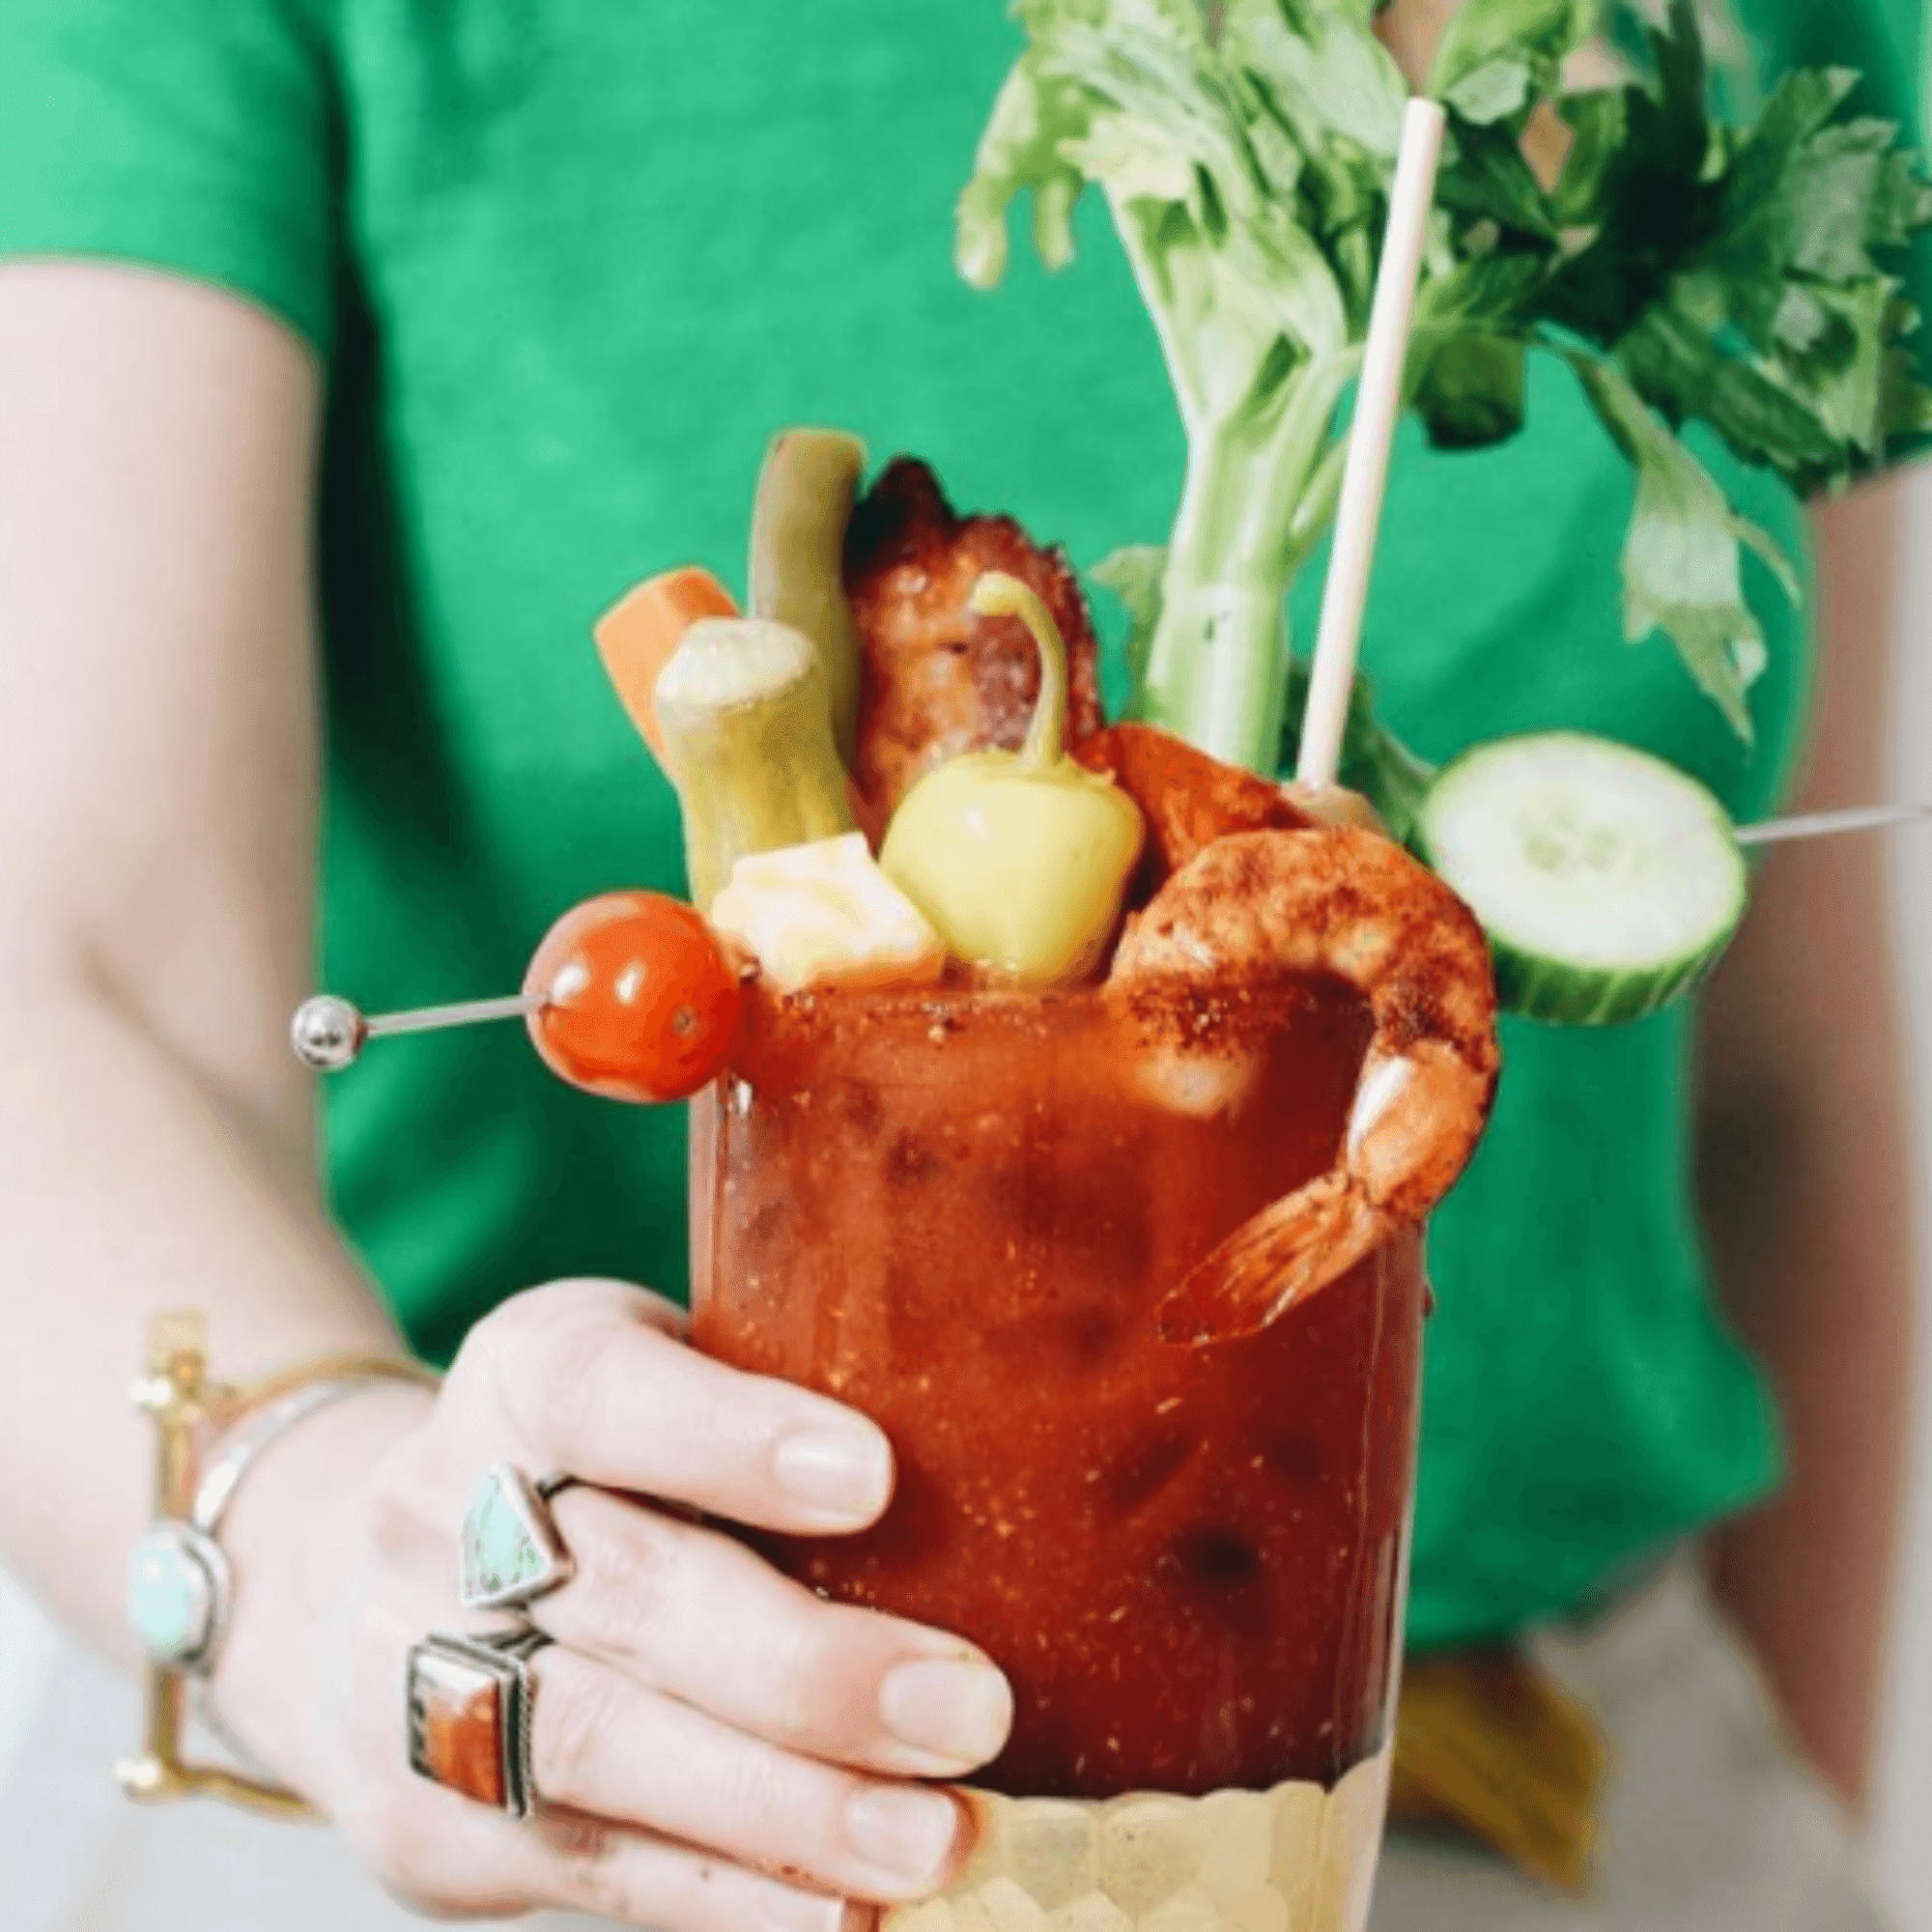 Bloody mary with garnishes and sustainable wheat straw